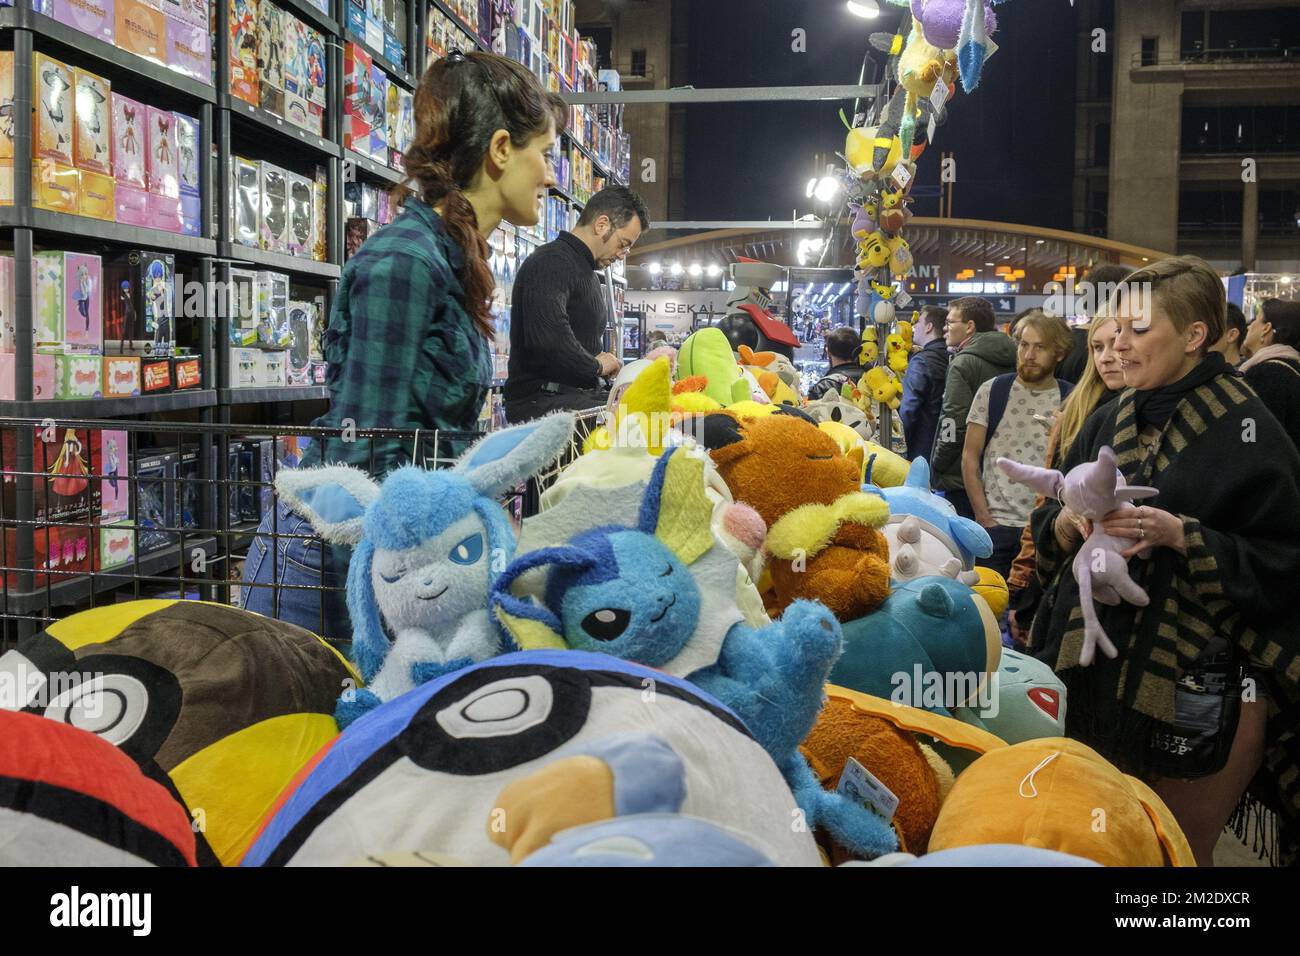 Ninth edition of Made in Asia in Brussels Plushes and teddies | Neuvieme edition du salon Made in Asia Culture pop manga asiatique Peluche et nounours 17/03/2018 Stock Photo